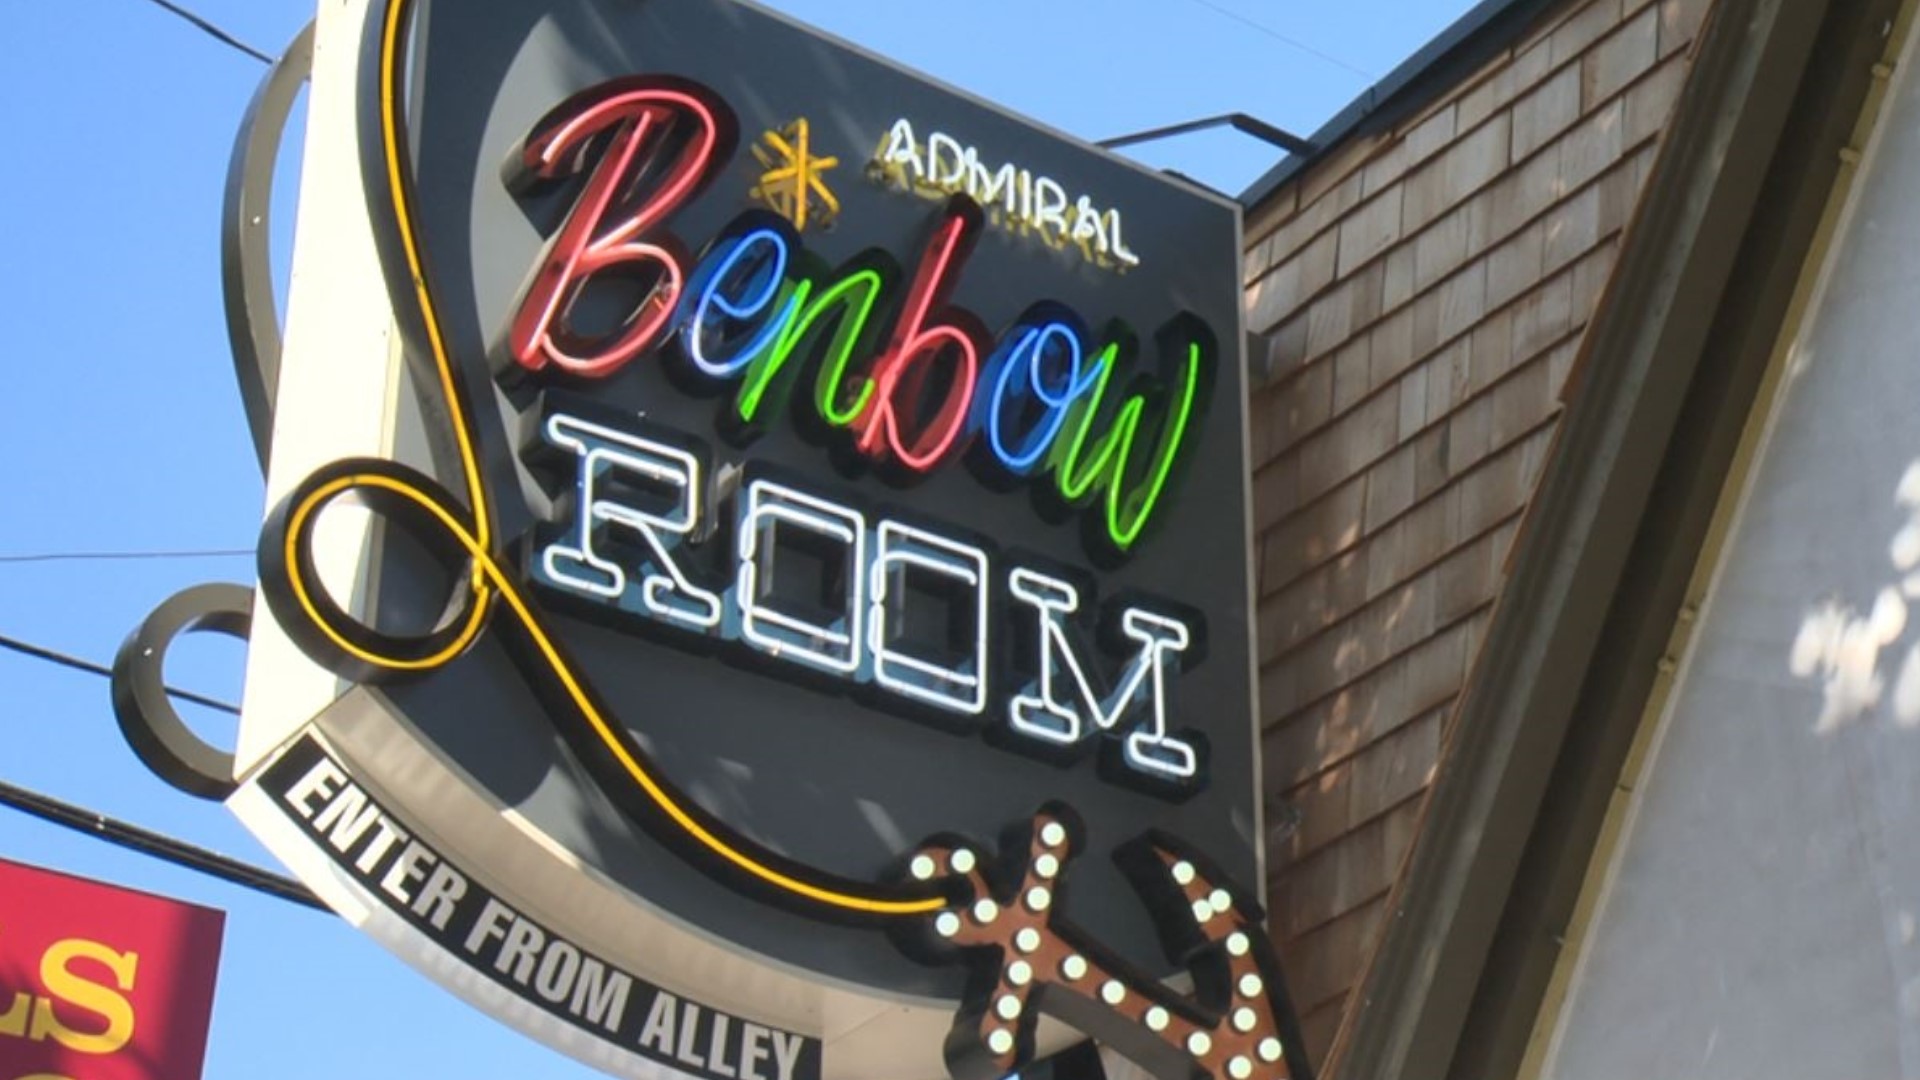 Admiral Benbow Room first opened in 1950 and became one of West Seattle's most popular gathering places. #k5evening